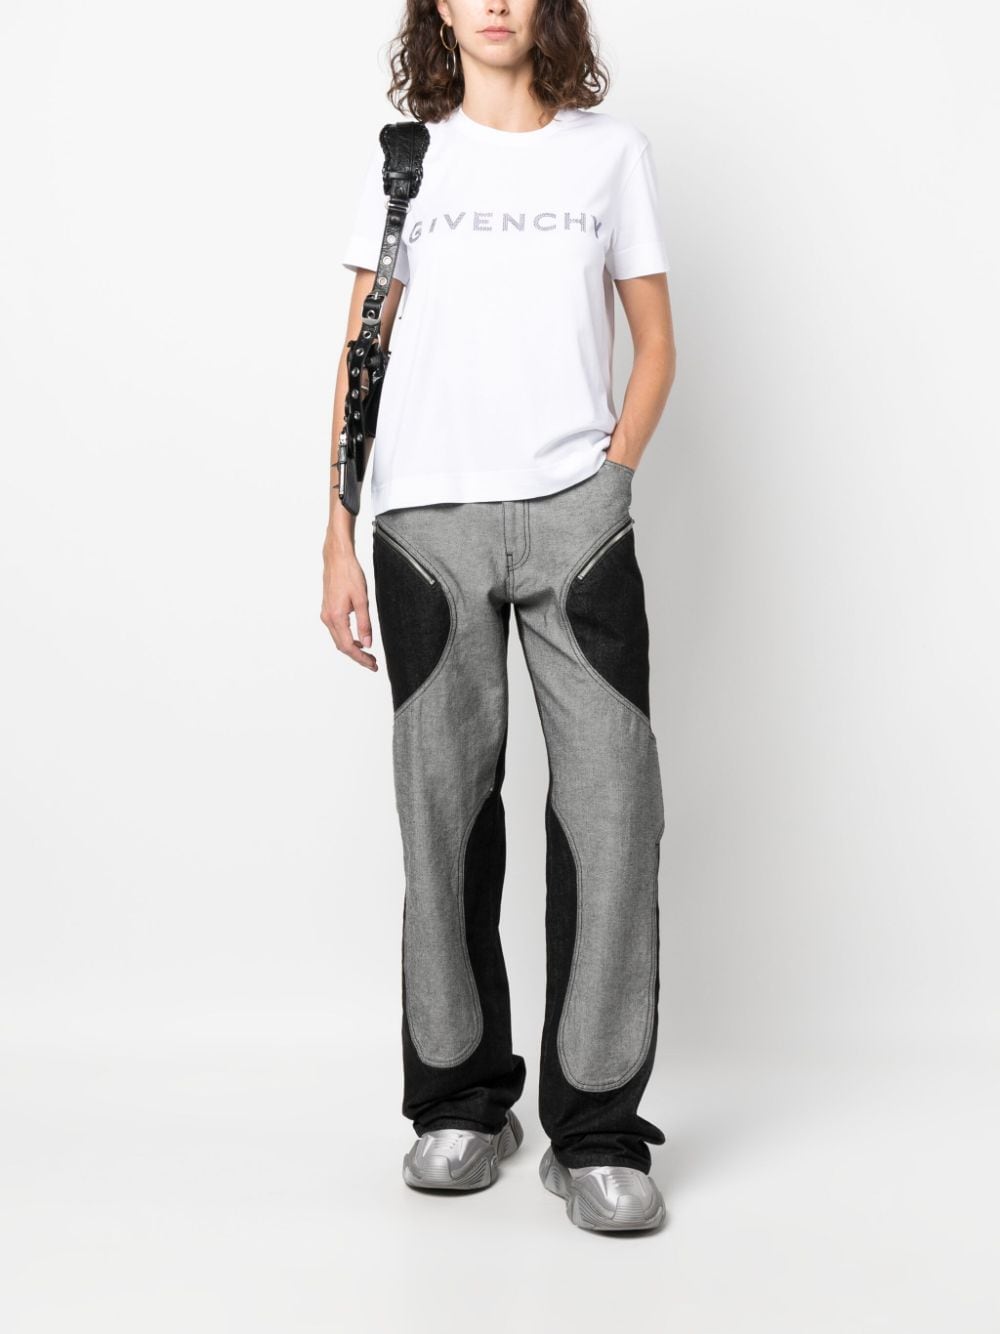 Givenchy T-shirt met logo - Wit